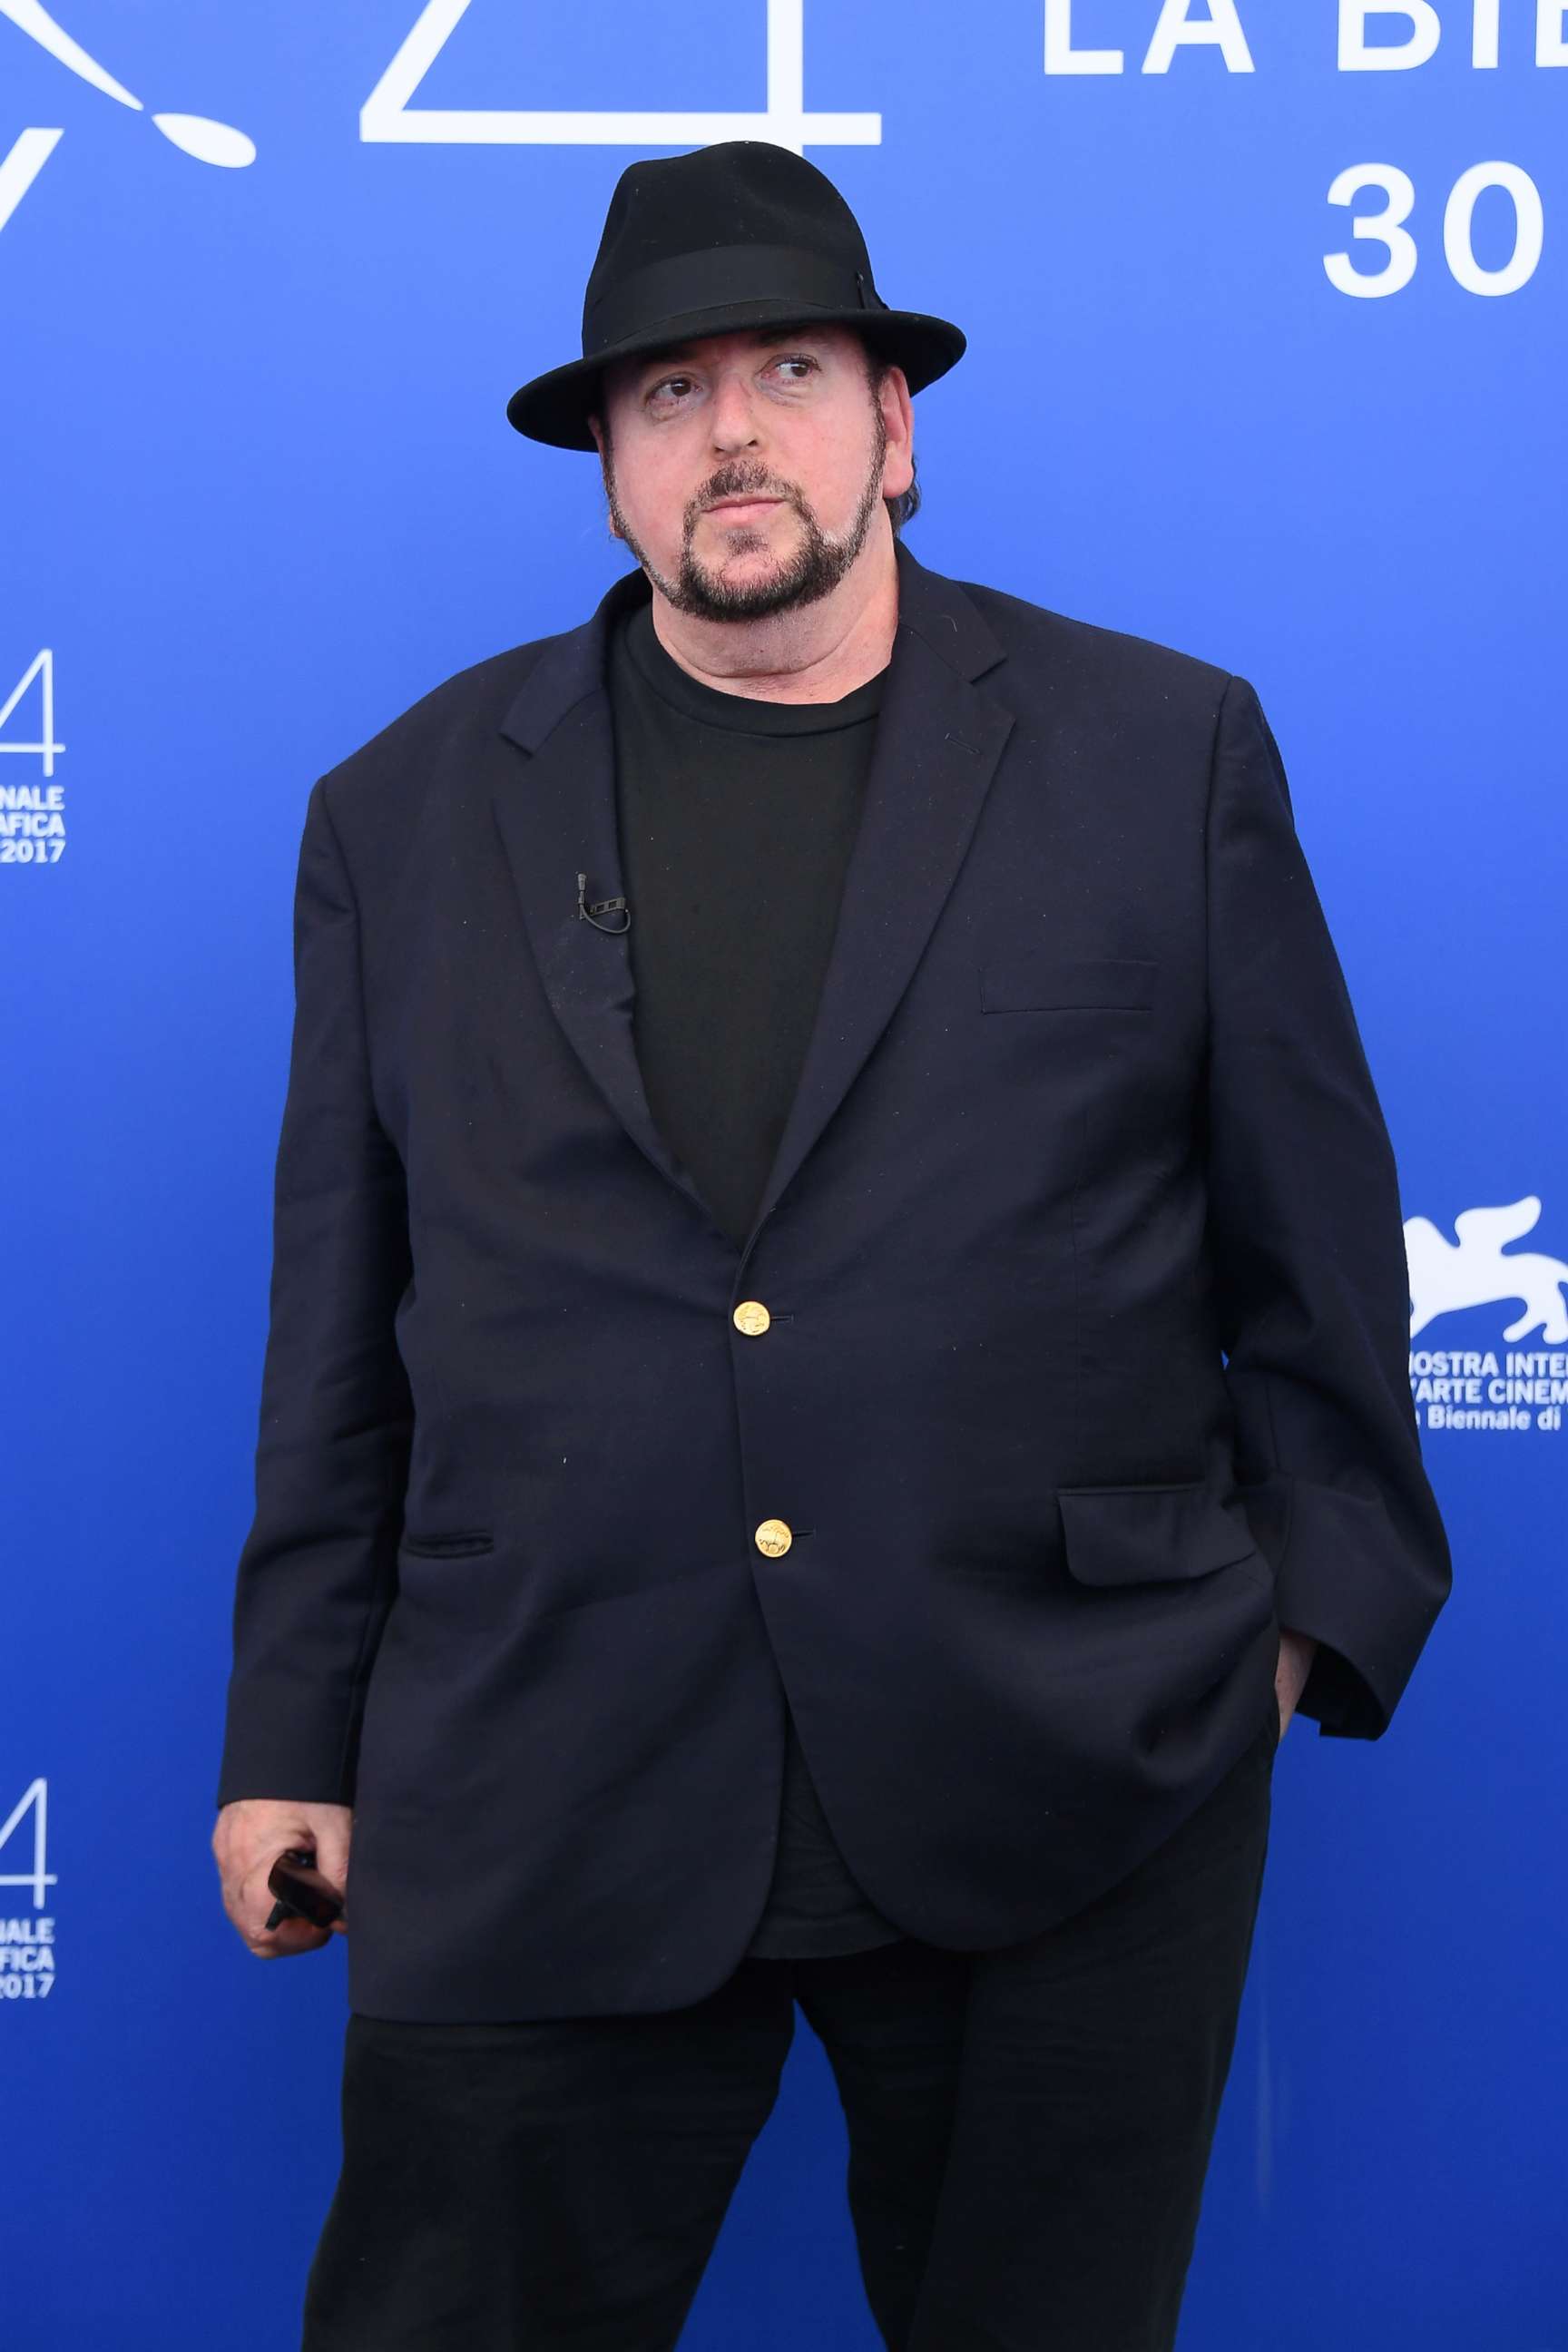 PHOTO: James Toback attends the 'The Private Life Of A Modern Woman' photocall during the 74th Venice Film Festival at Sala Casino, Sept. 3, 2017 in Venice, Italy. 